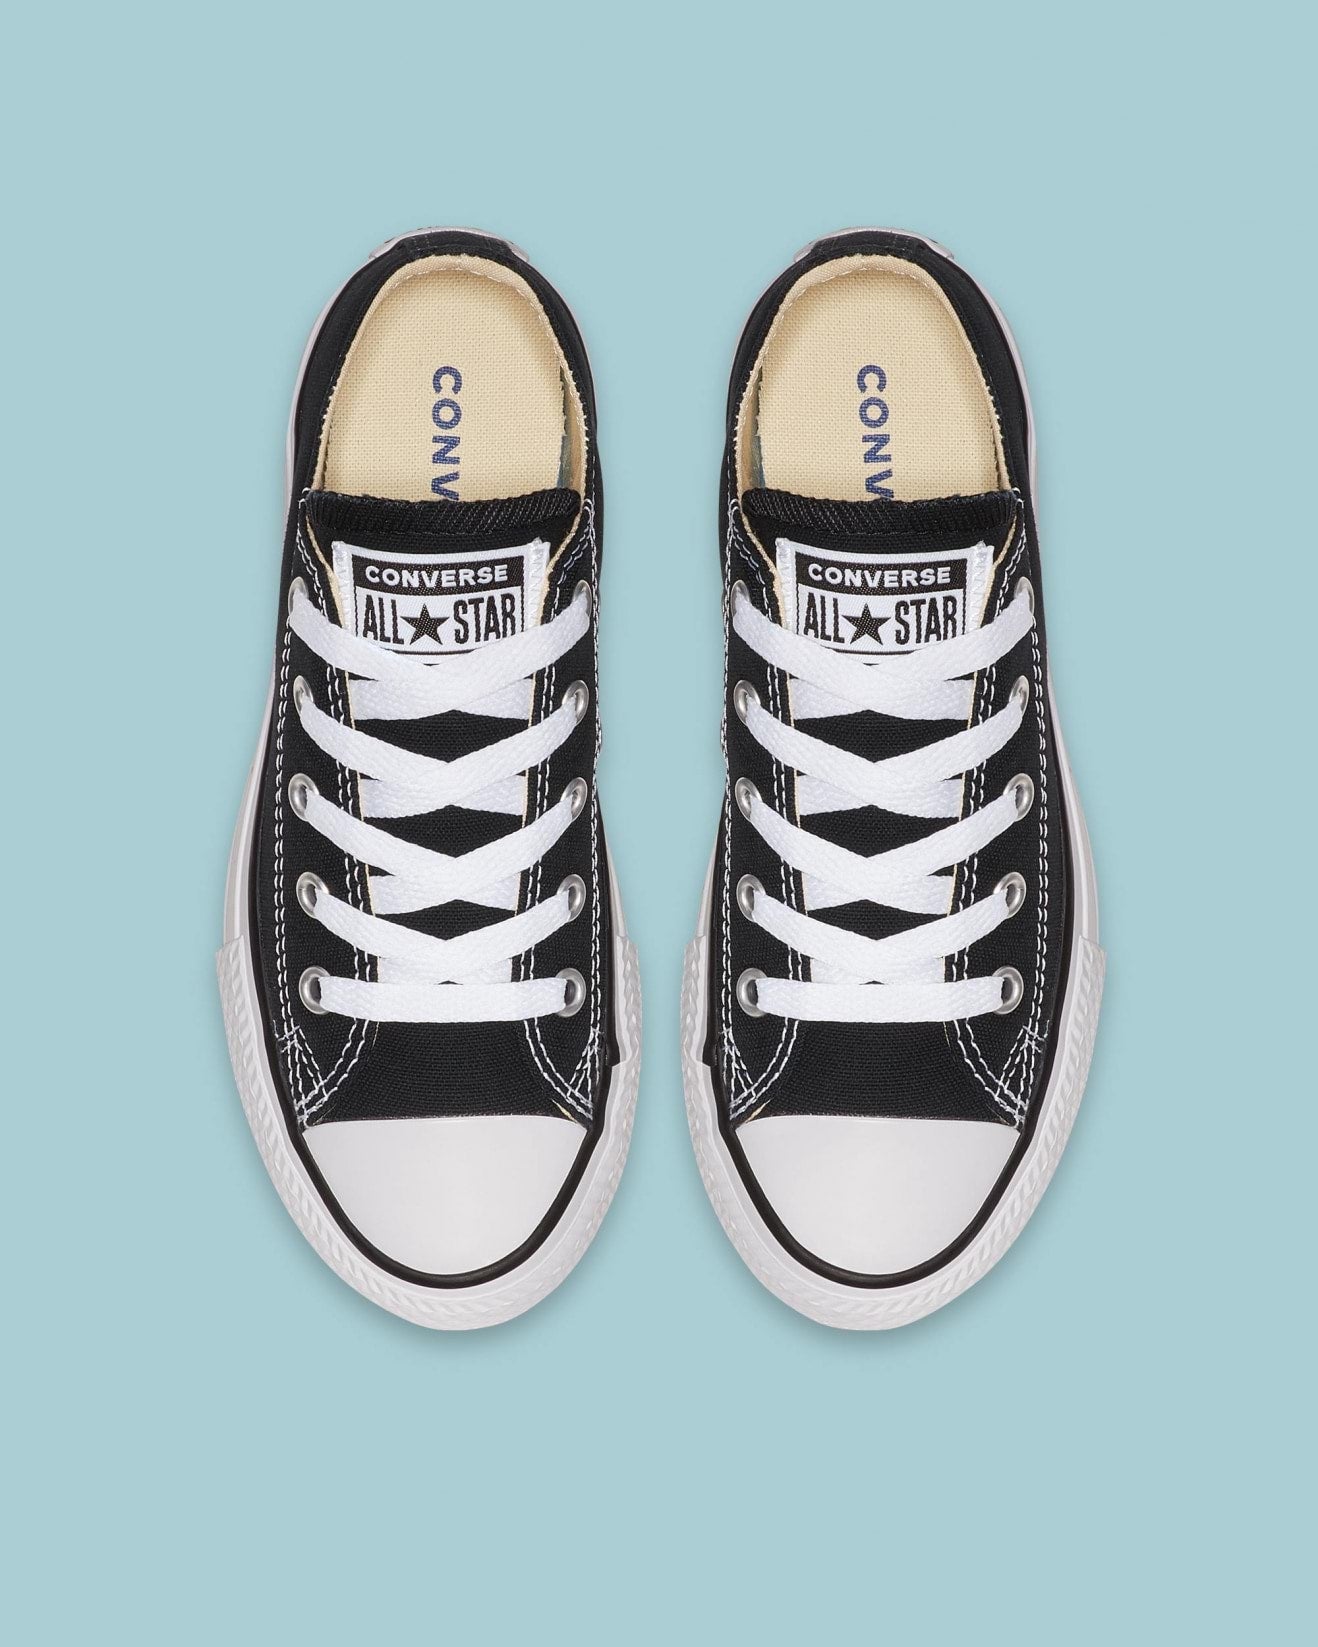 CONVERSE Chuck Taylor All Star Youth Low Shoe - Black - VENUE.